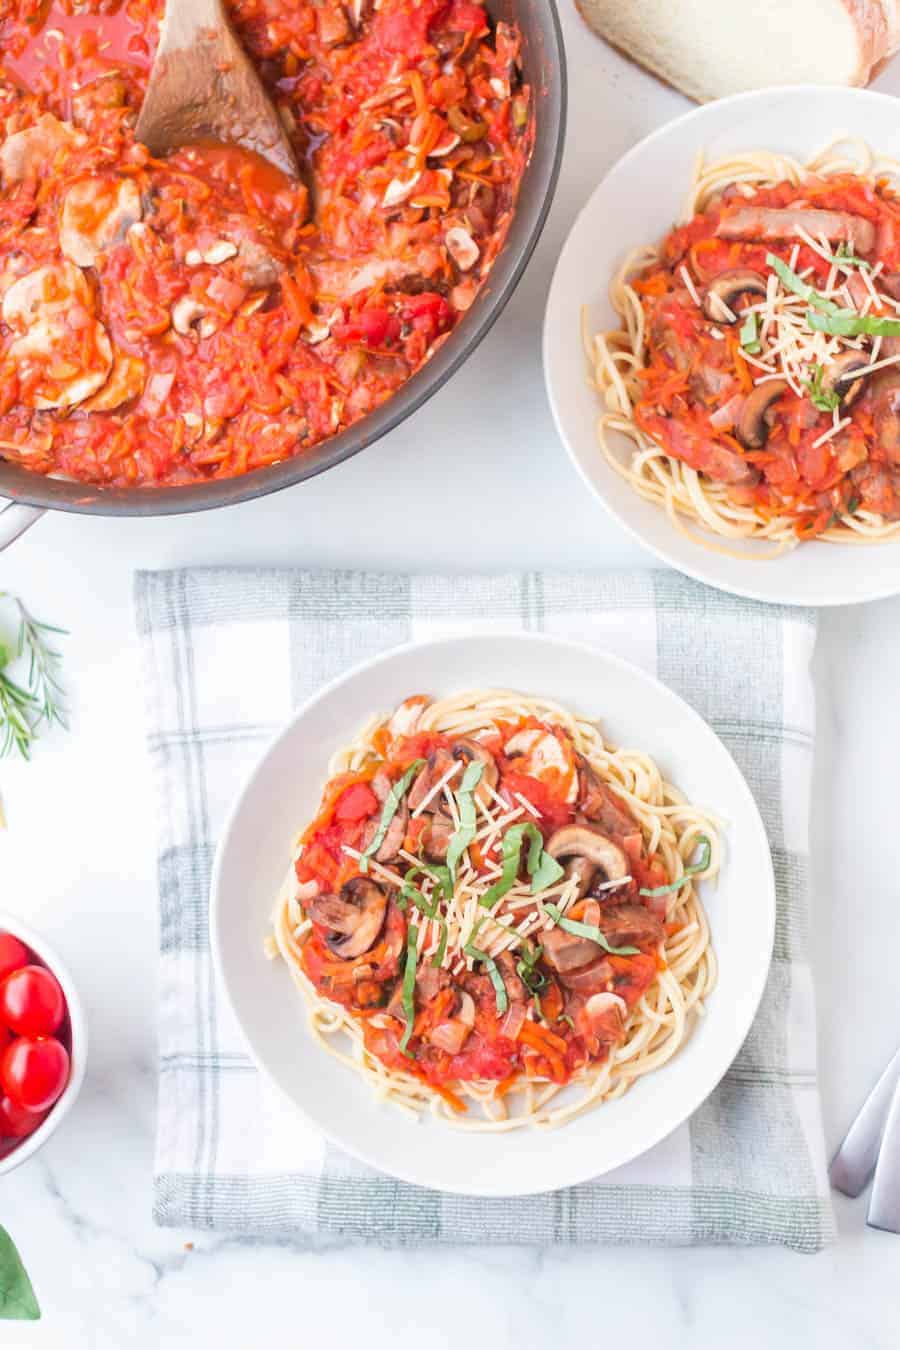 Steak and mushroom marinara is a hearty and rich pasta dish that's packed with bites of yummy steak, mushrooms, celery, carrots, onion, tomatoes, and decadent herbs. #pasta #marinara #steak #mushrooms #marinarapasta